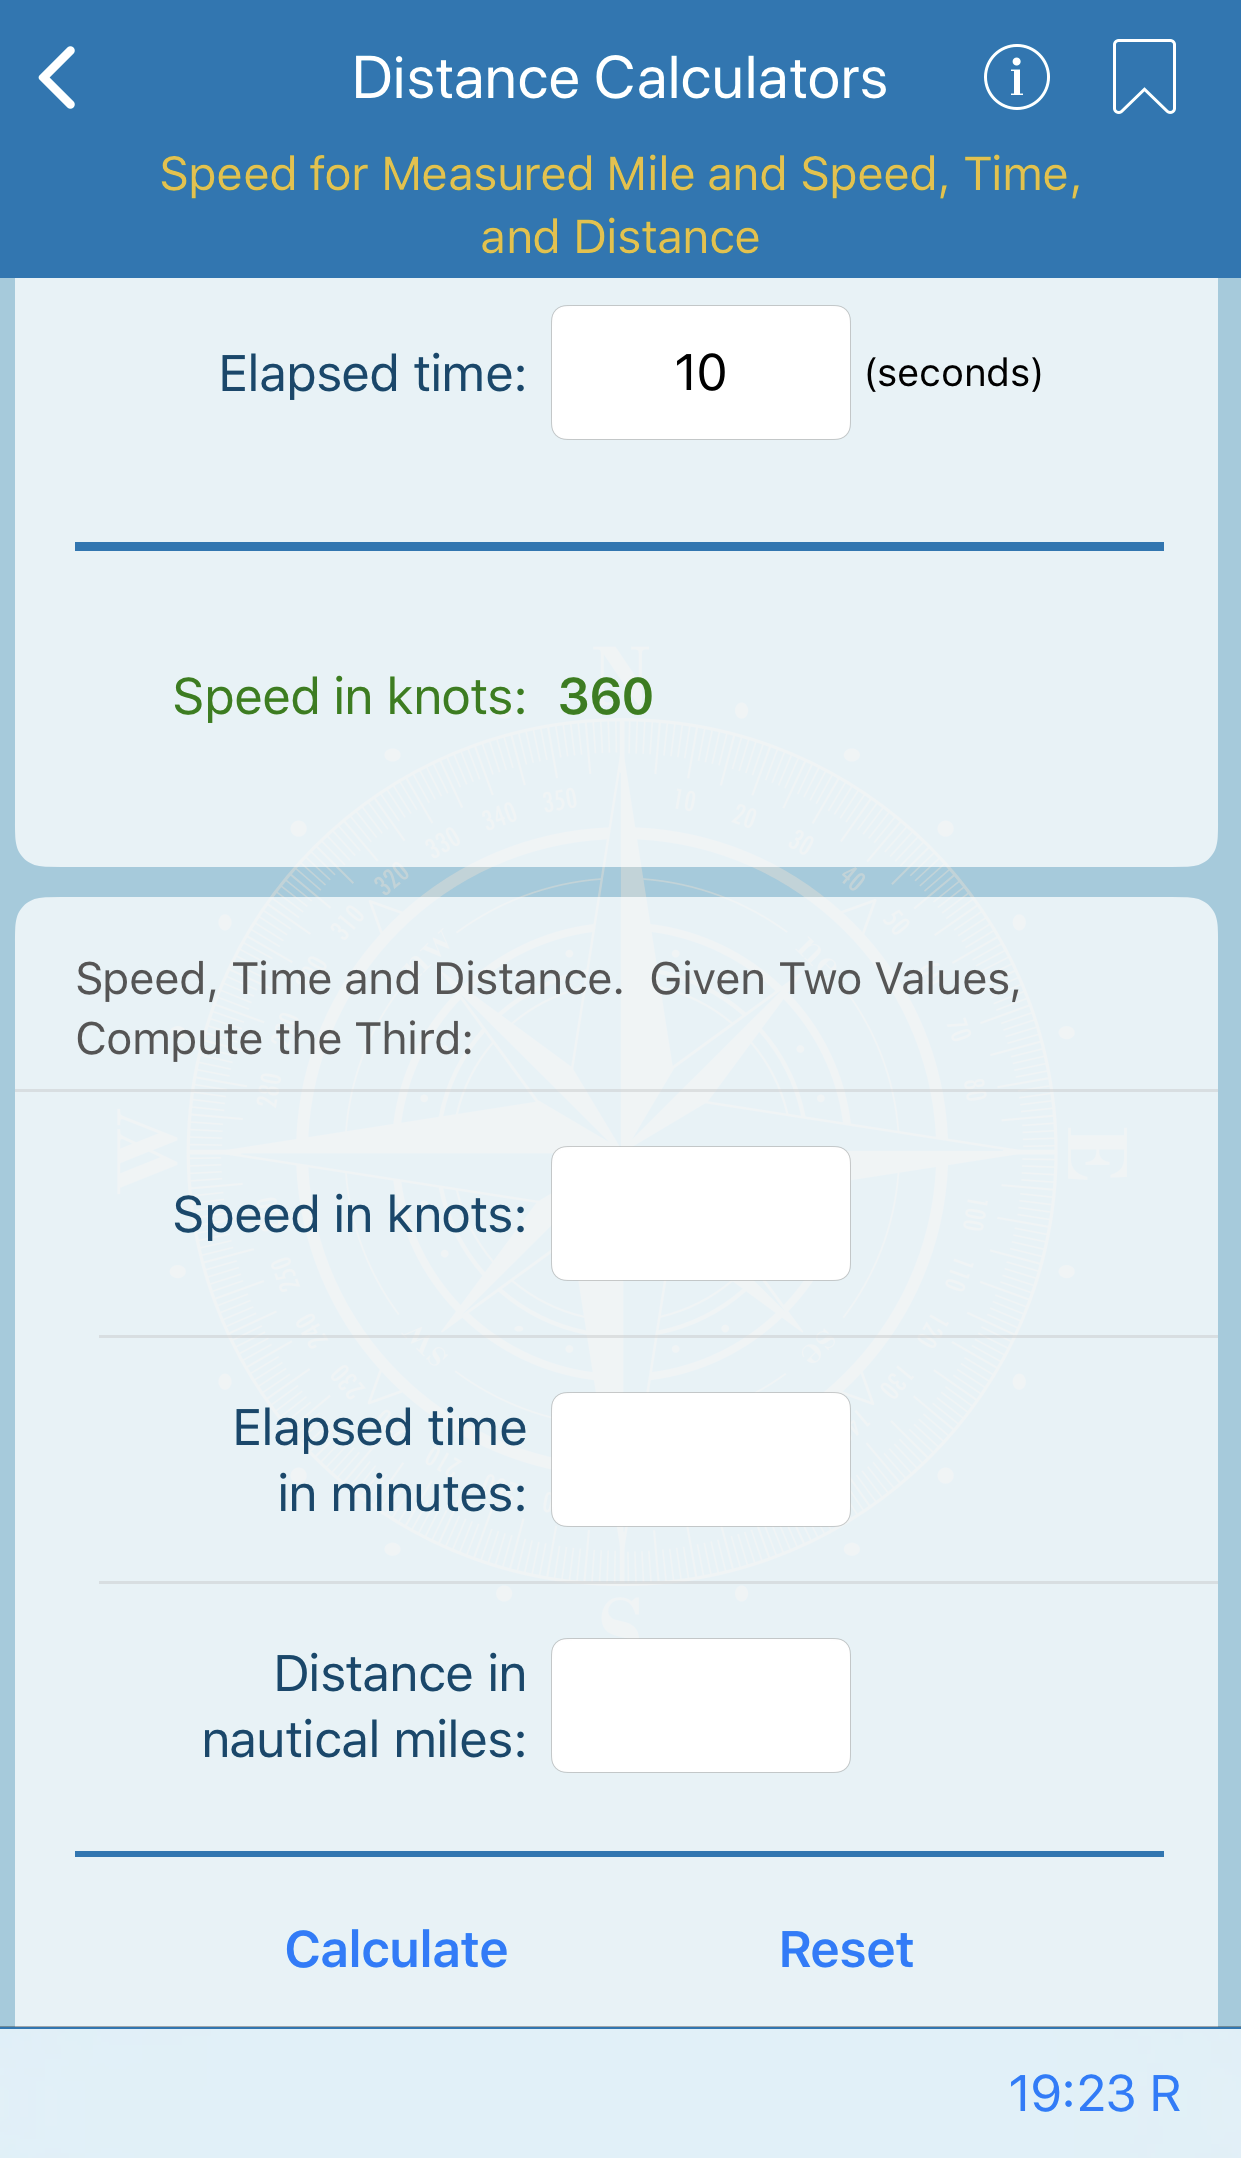 Speed for Measured Mile and Speed, Time, and Distance